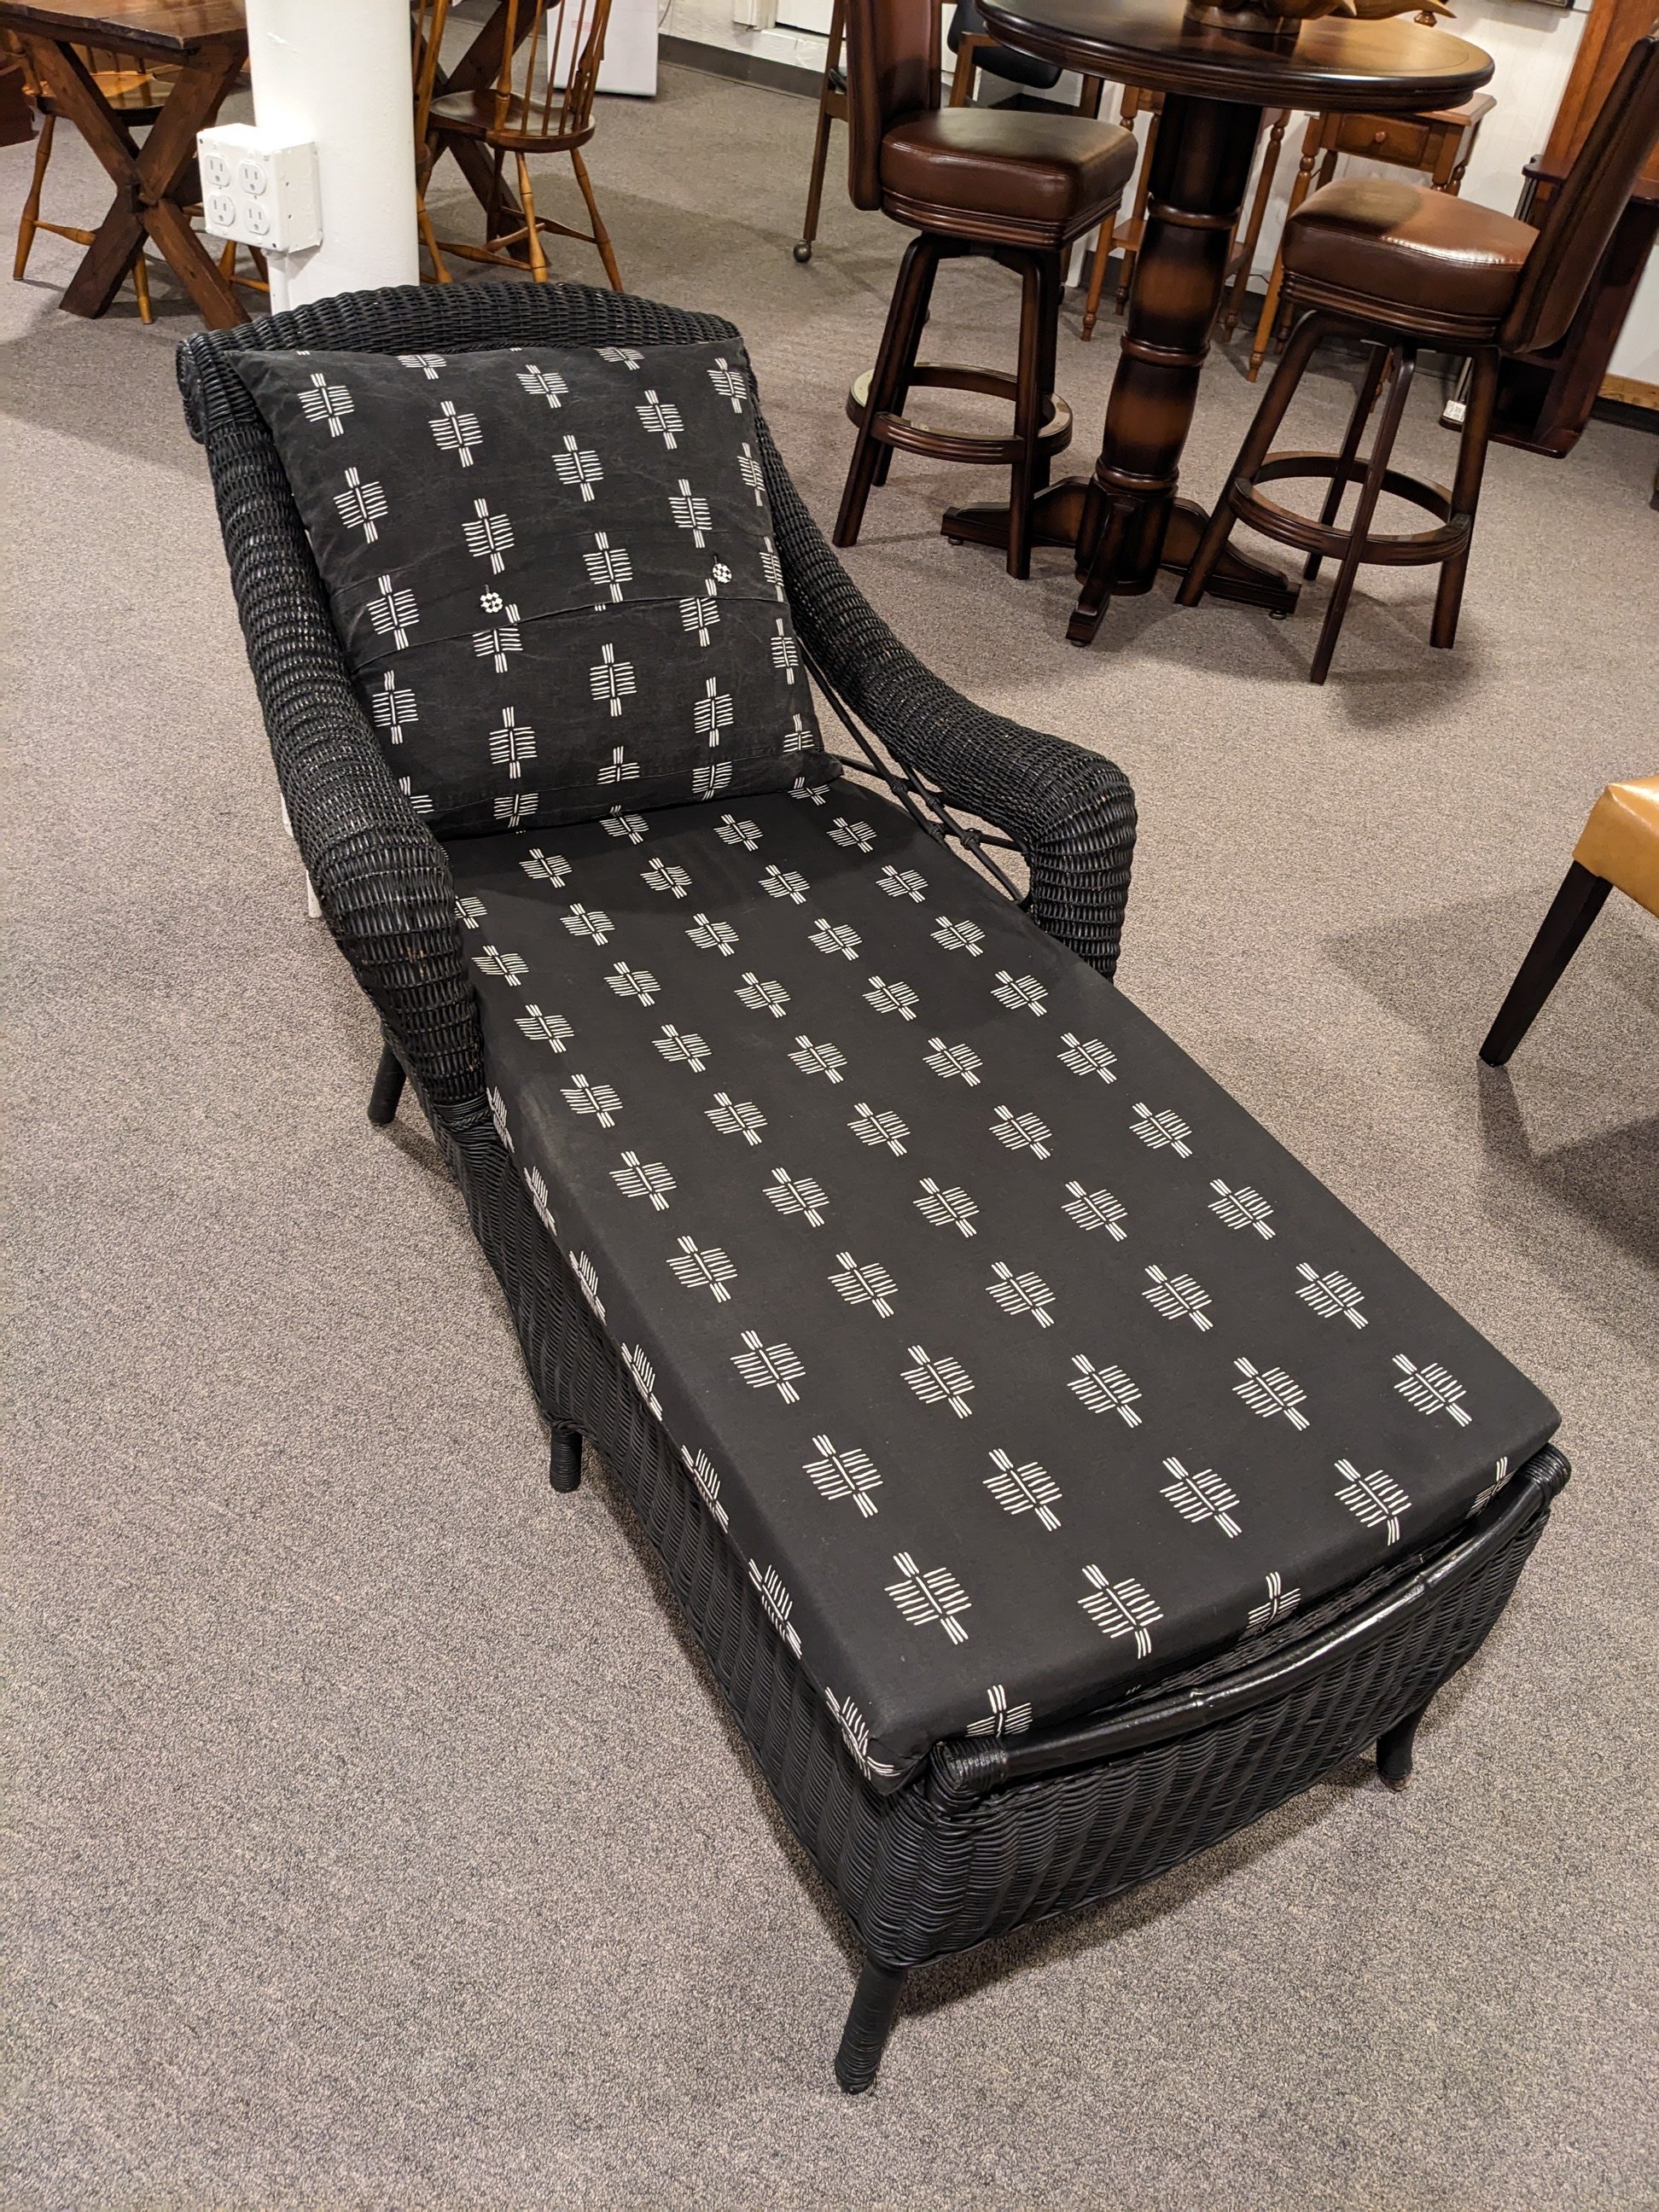 Black Wicker Chaise Lounge Chair